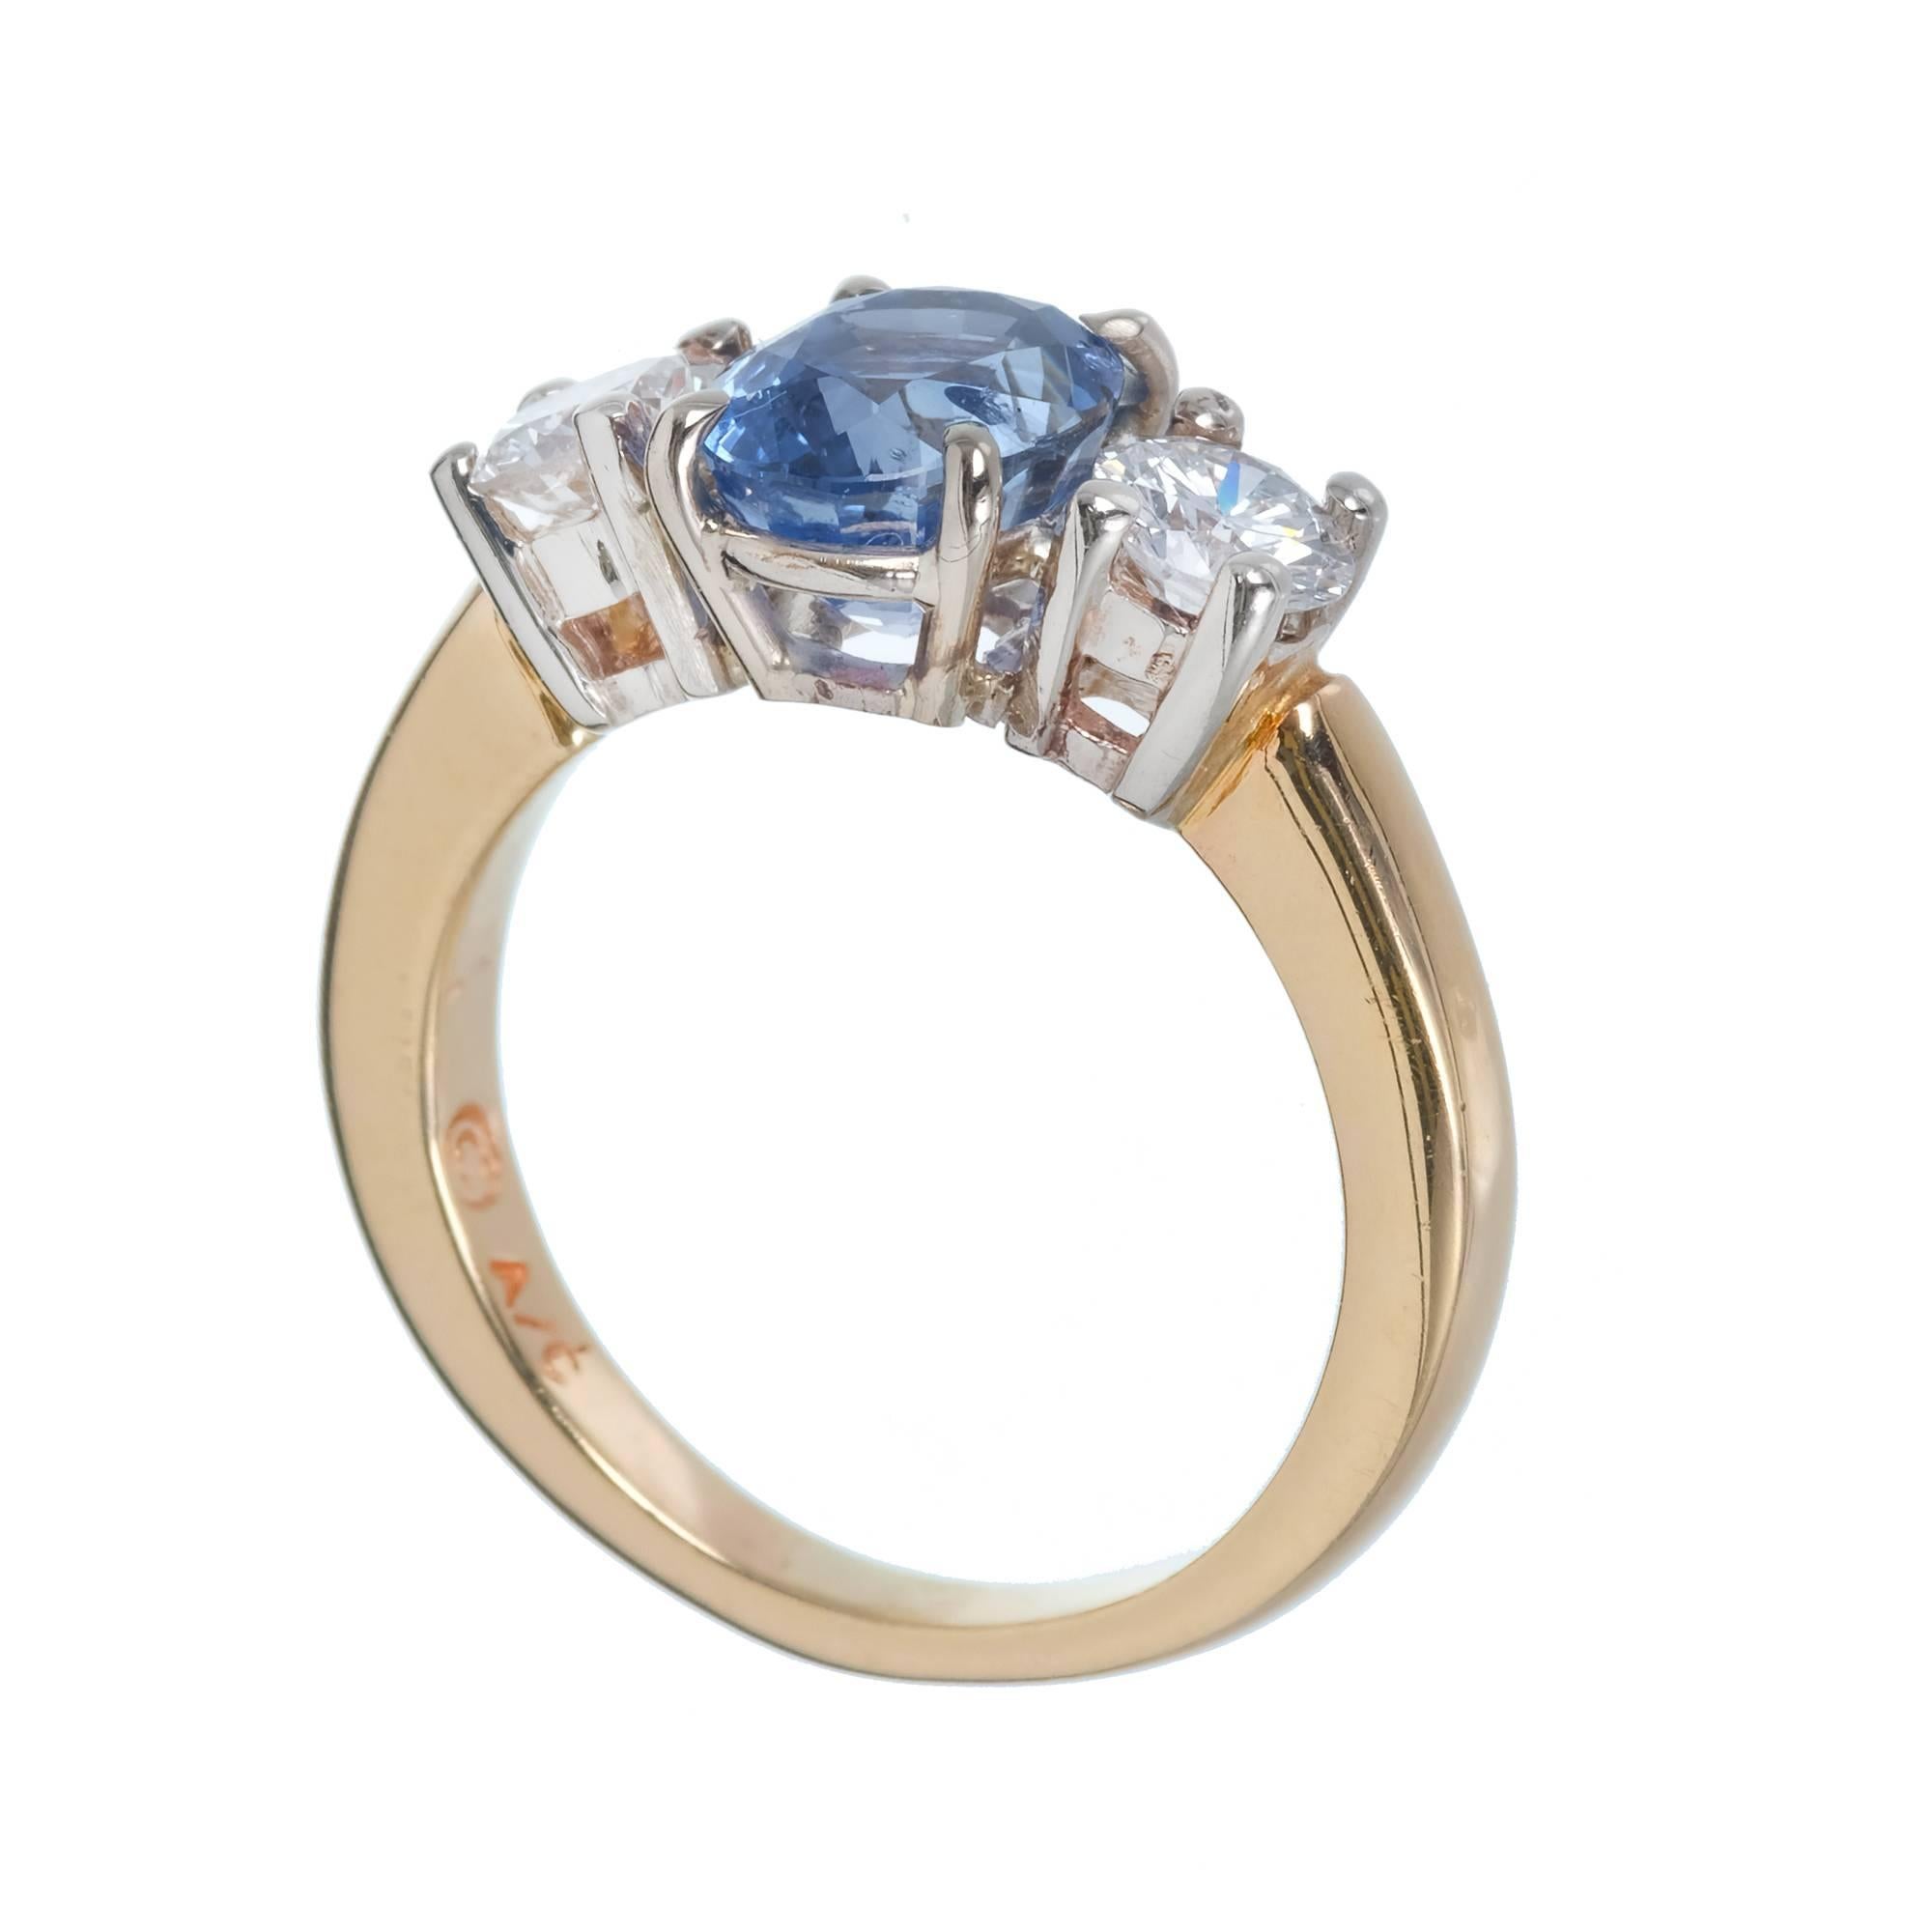 2.14 Carat Oval Natural Blue Sapphire Diamond Gold Engagement Ring 5